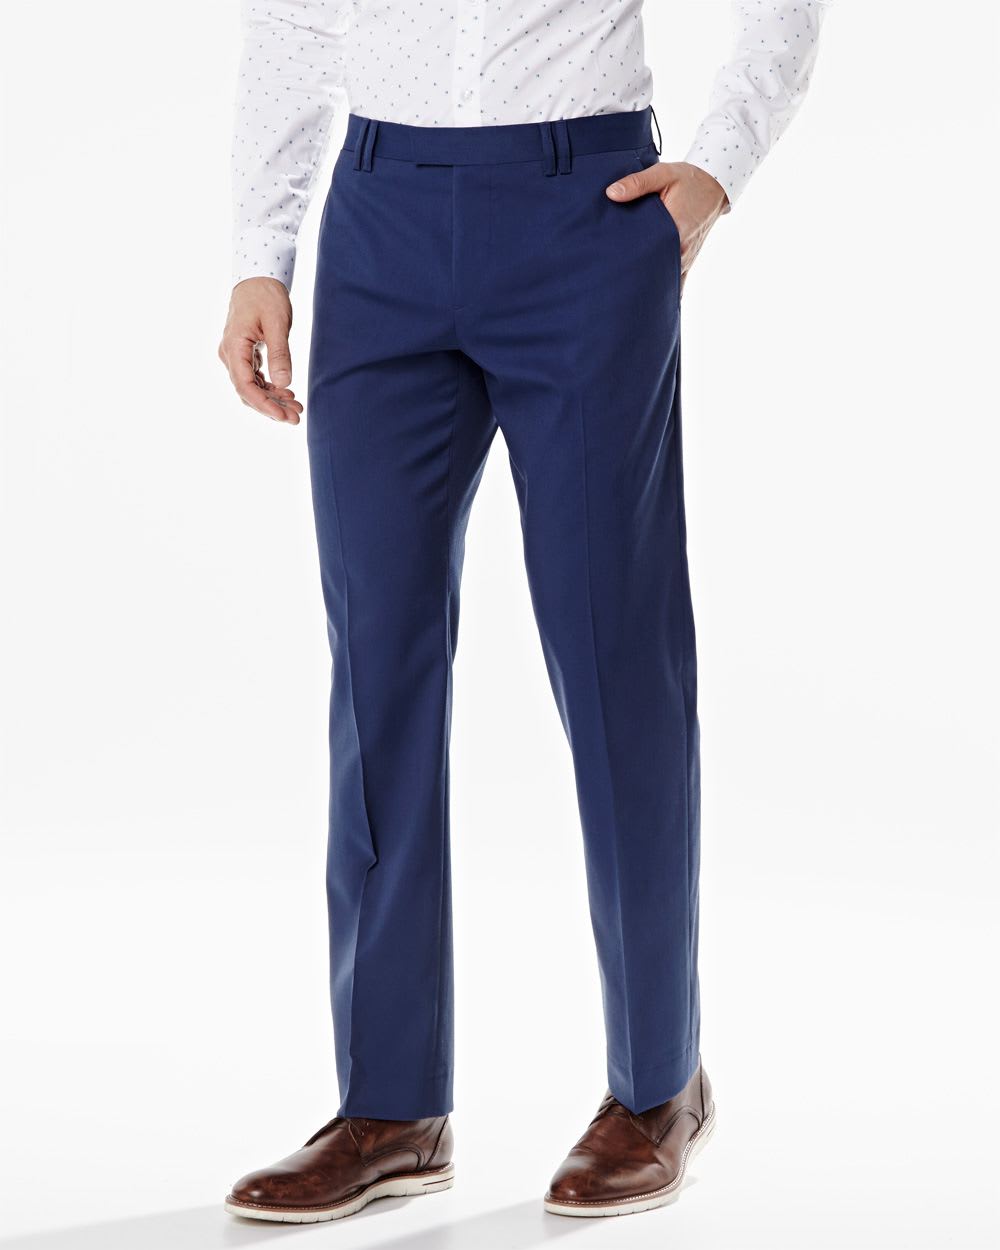 Tailored Fit stretch pant in bold blue - Regular | RW&CO.